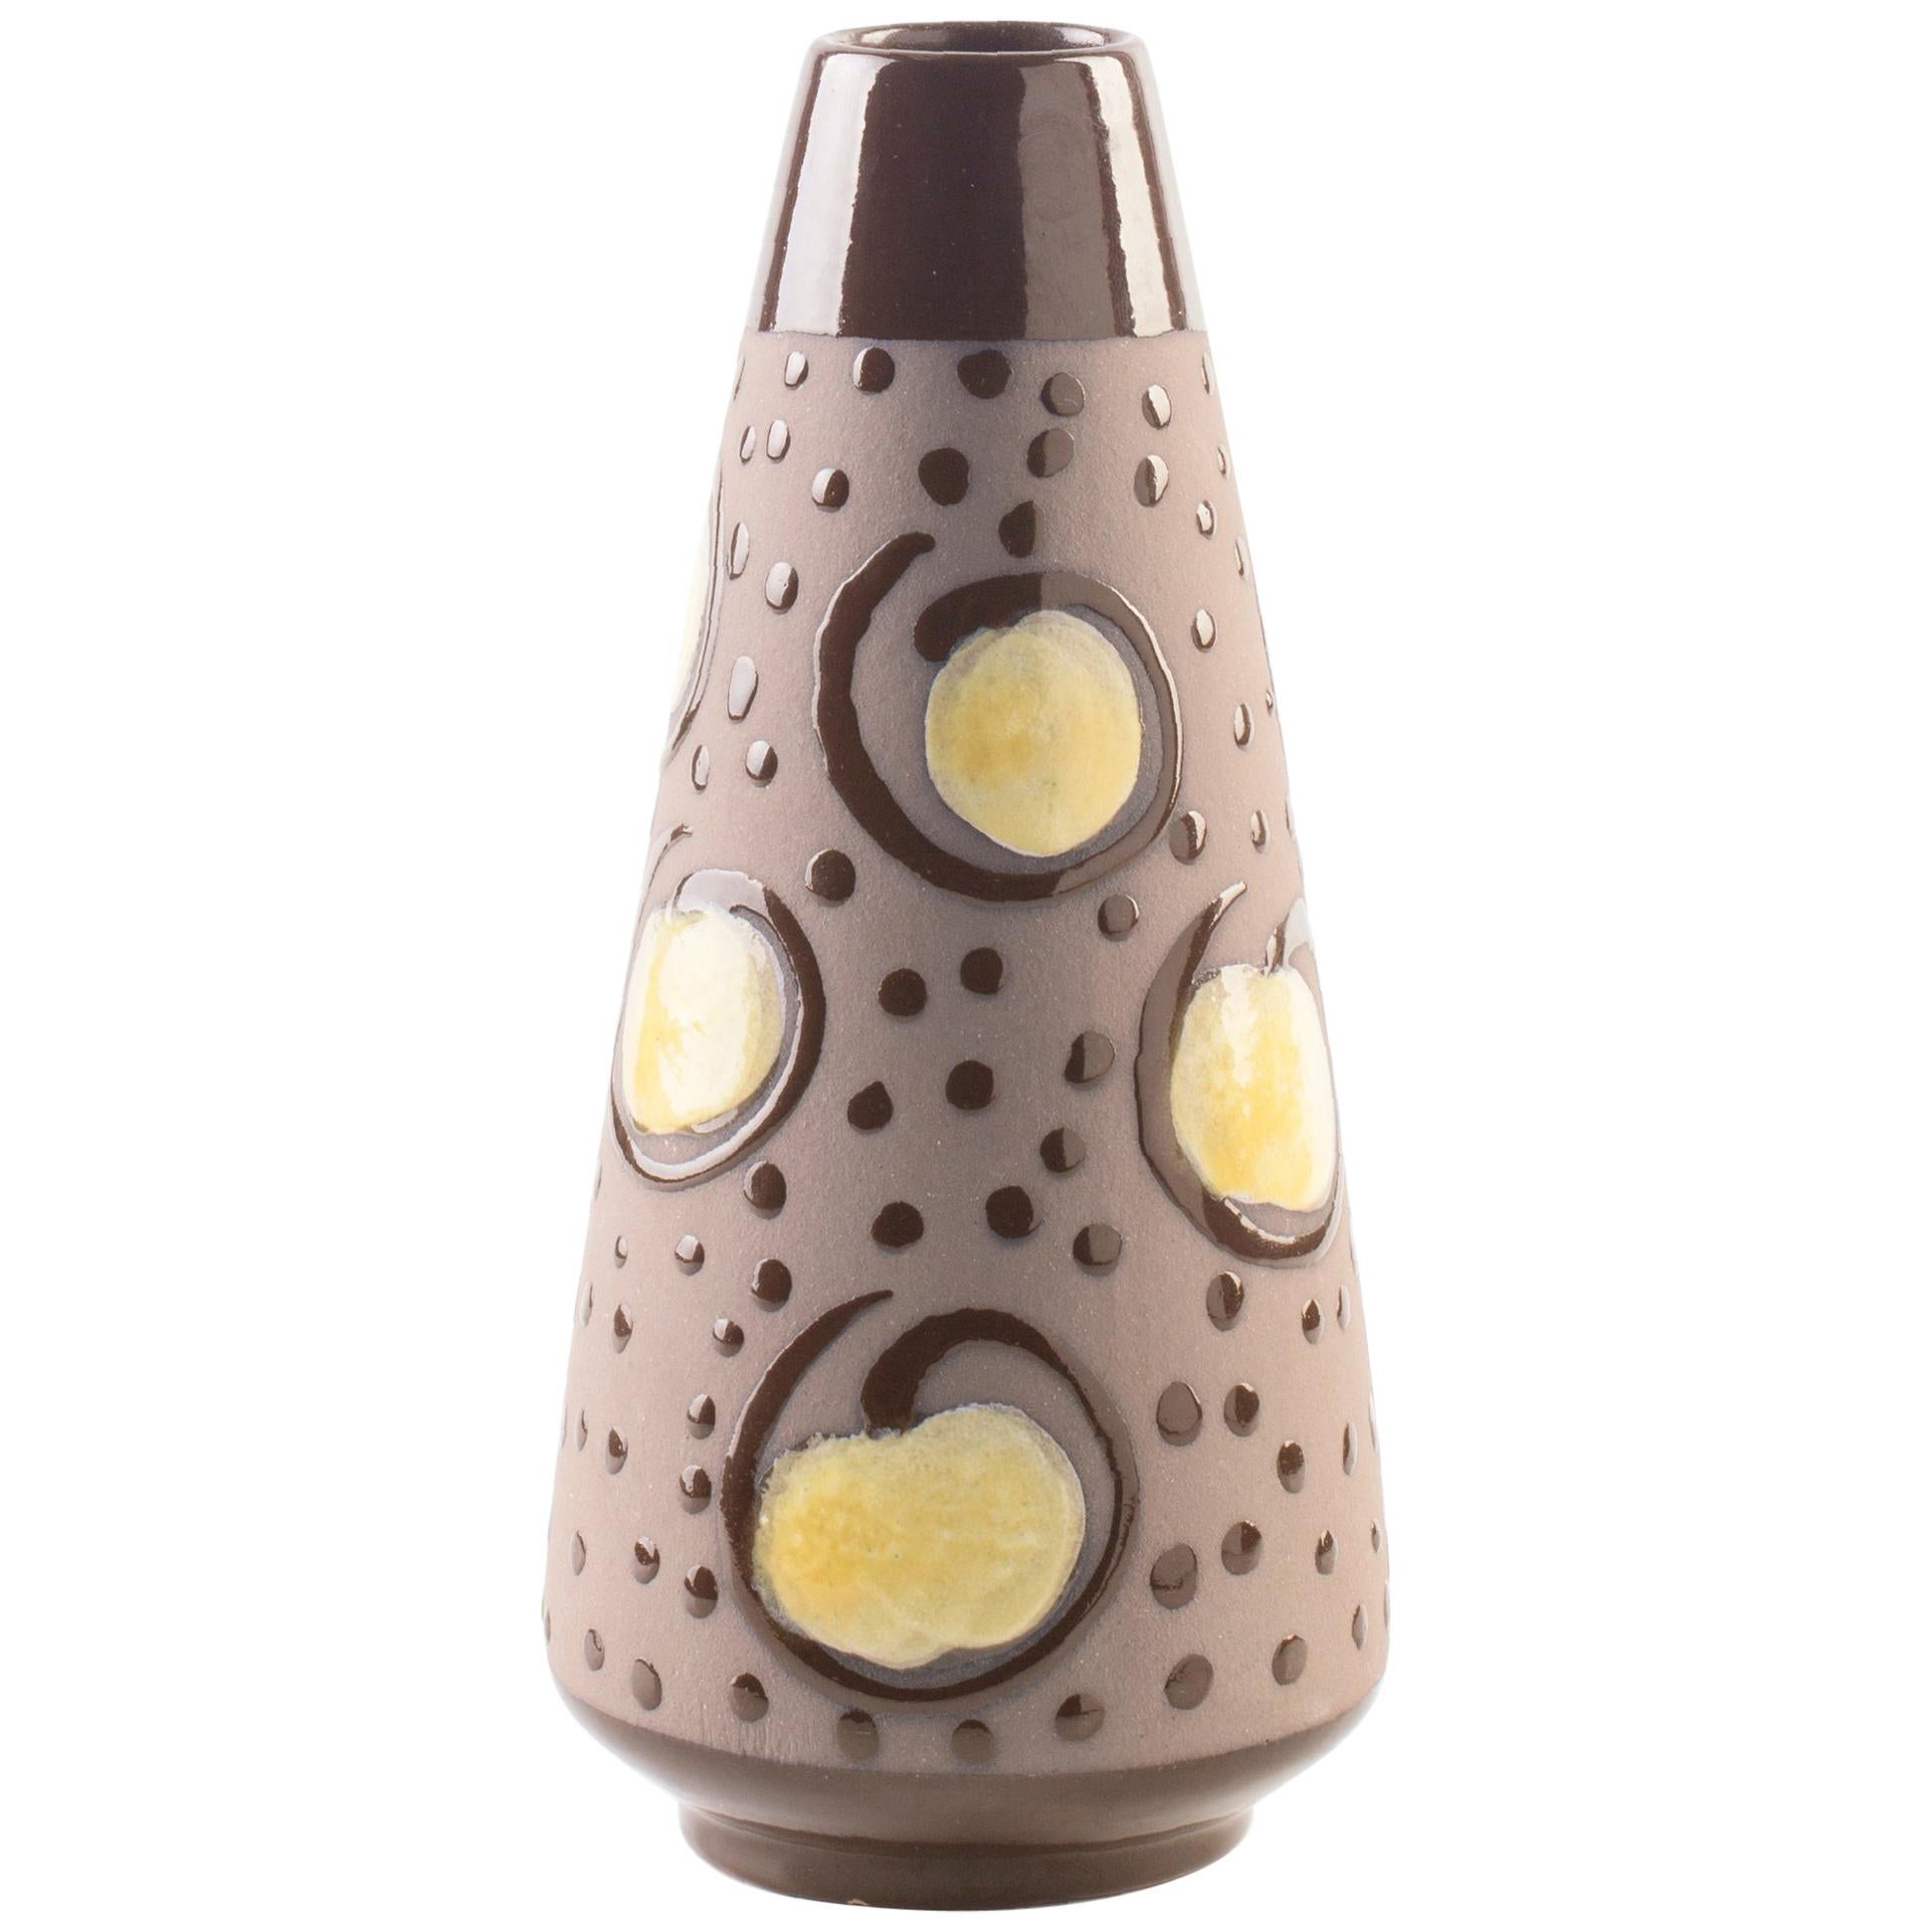 Vintage Strehla Brown and Yellow Vase, Germany, Mid-20th Century For Sale